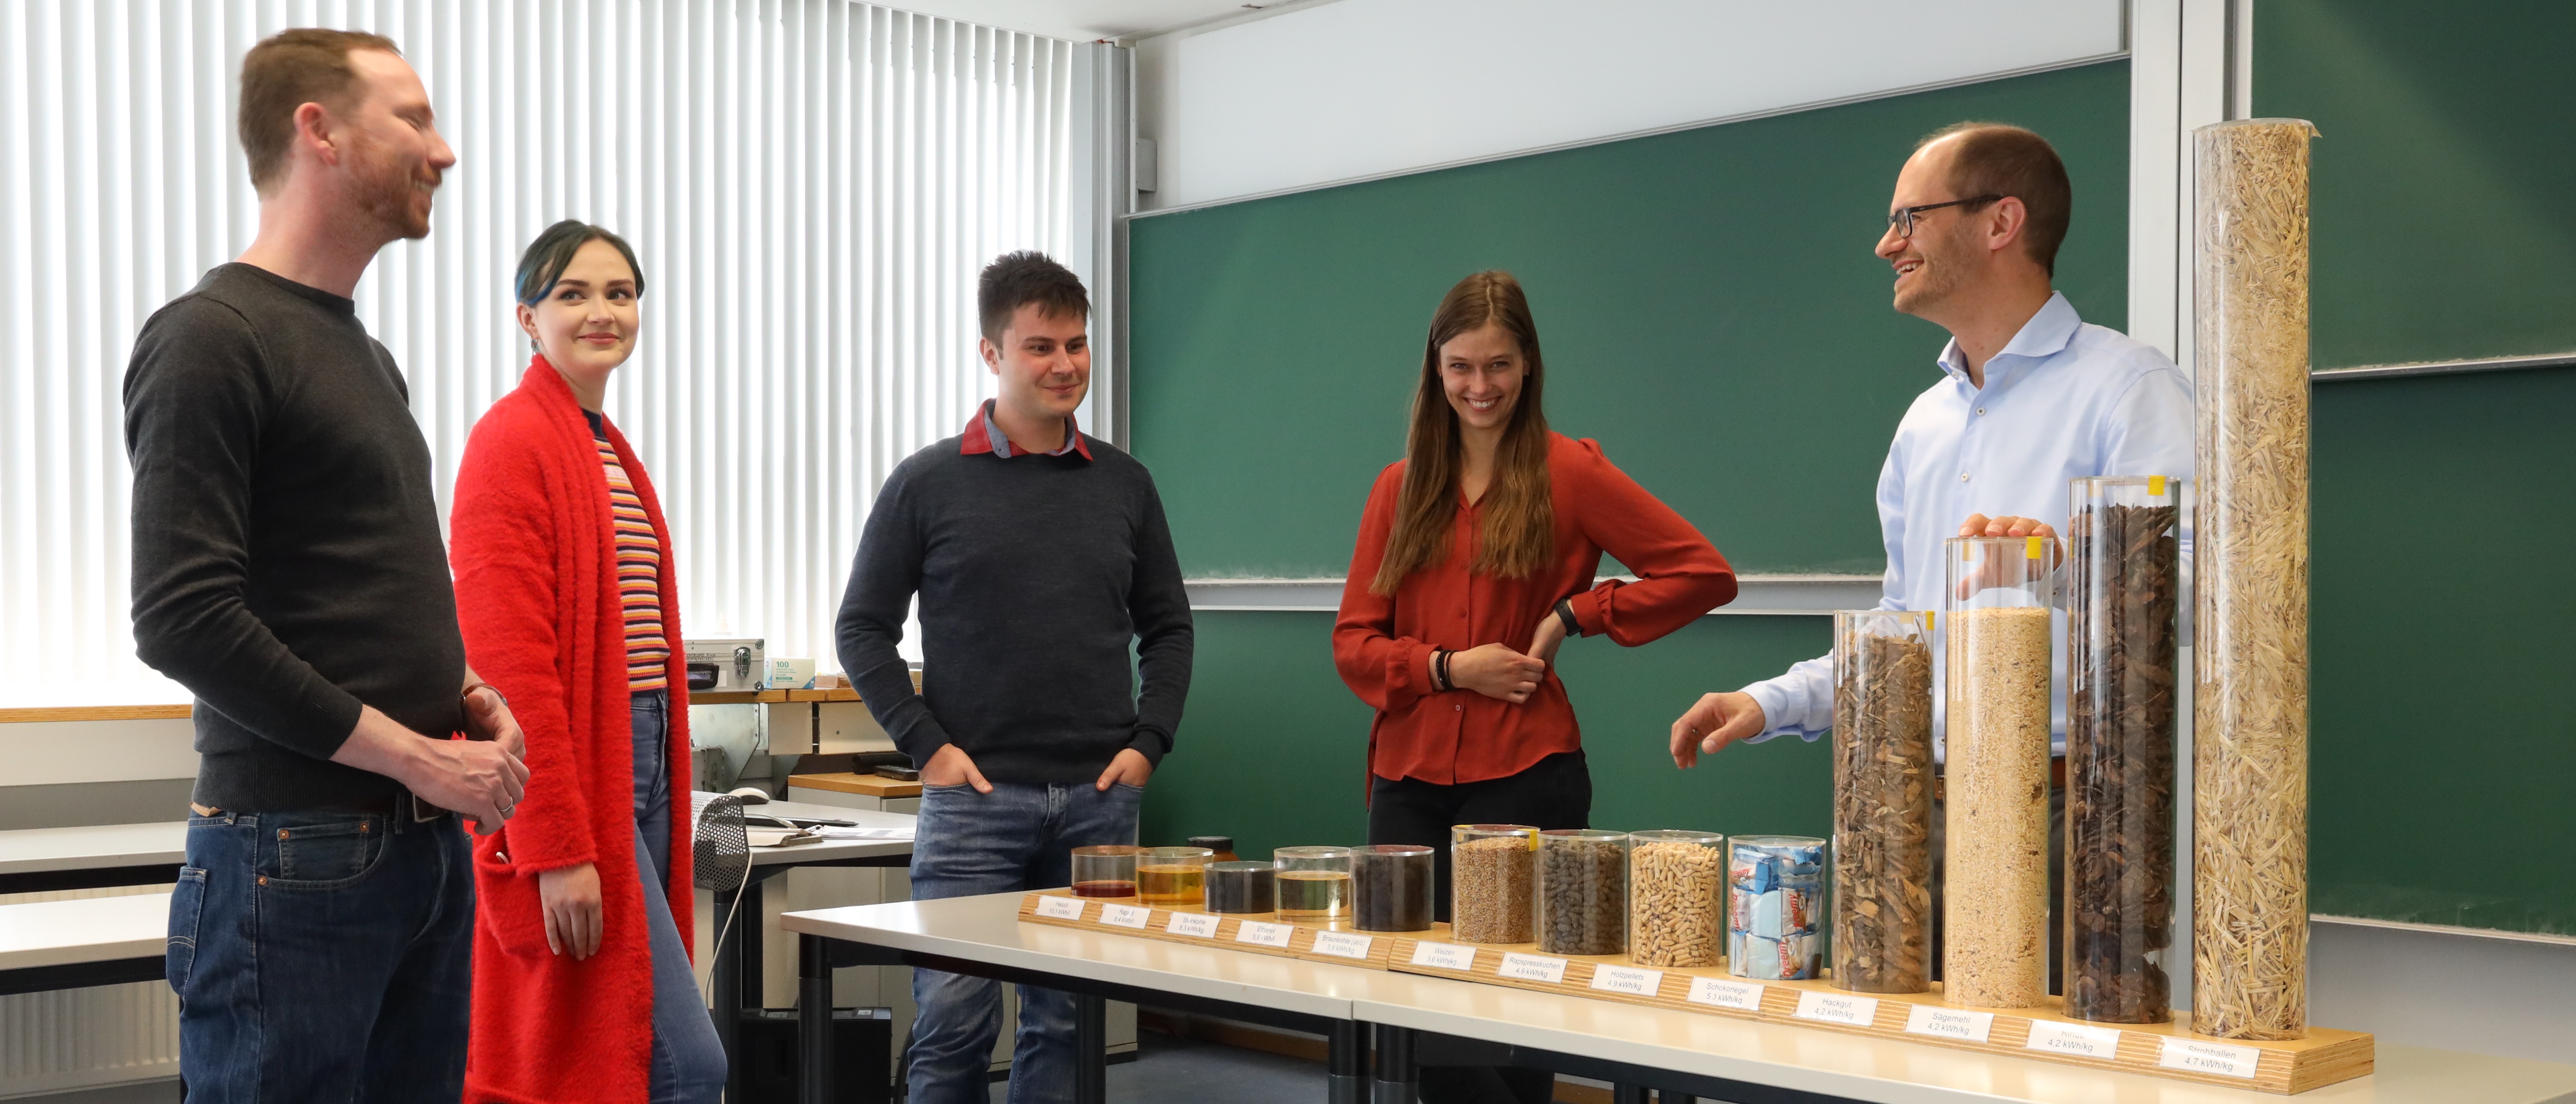 Professor shows a group of students different materials to represent the watt-hours per kilogram that can be obtained from each material